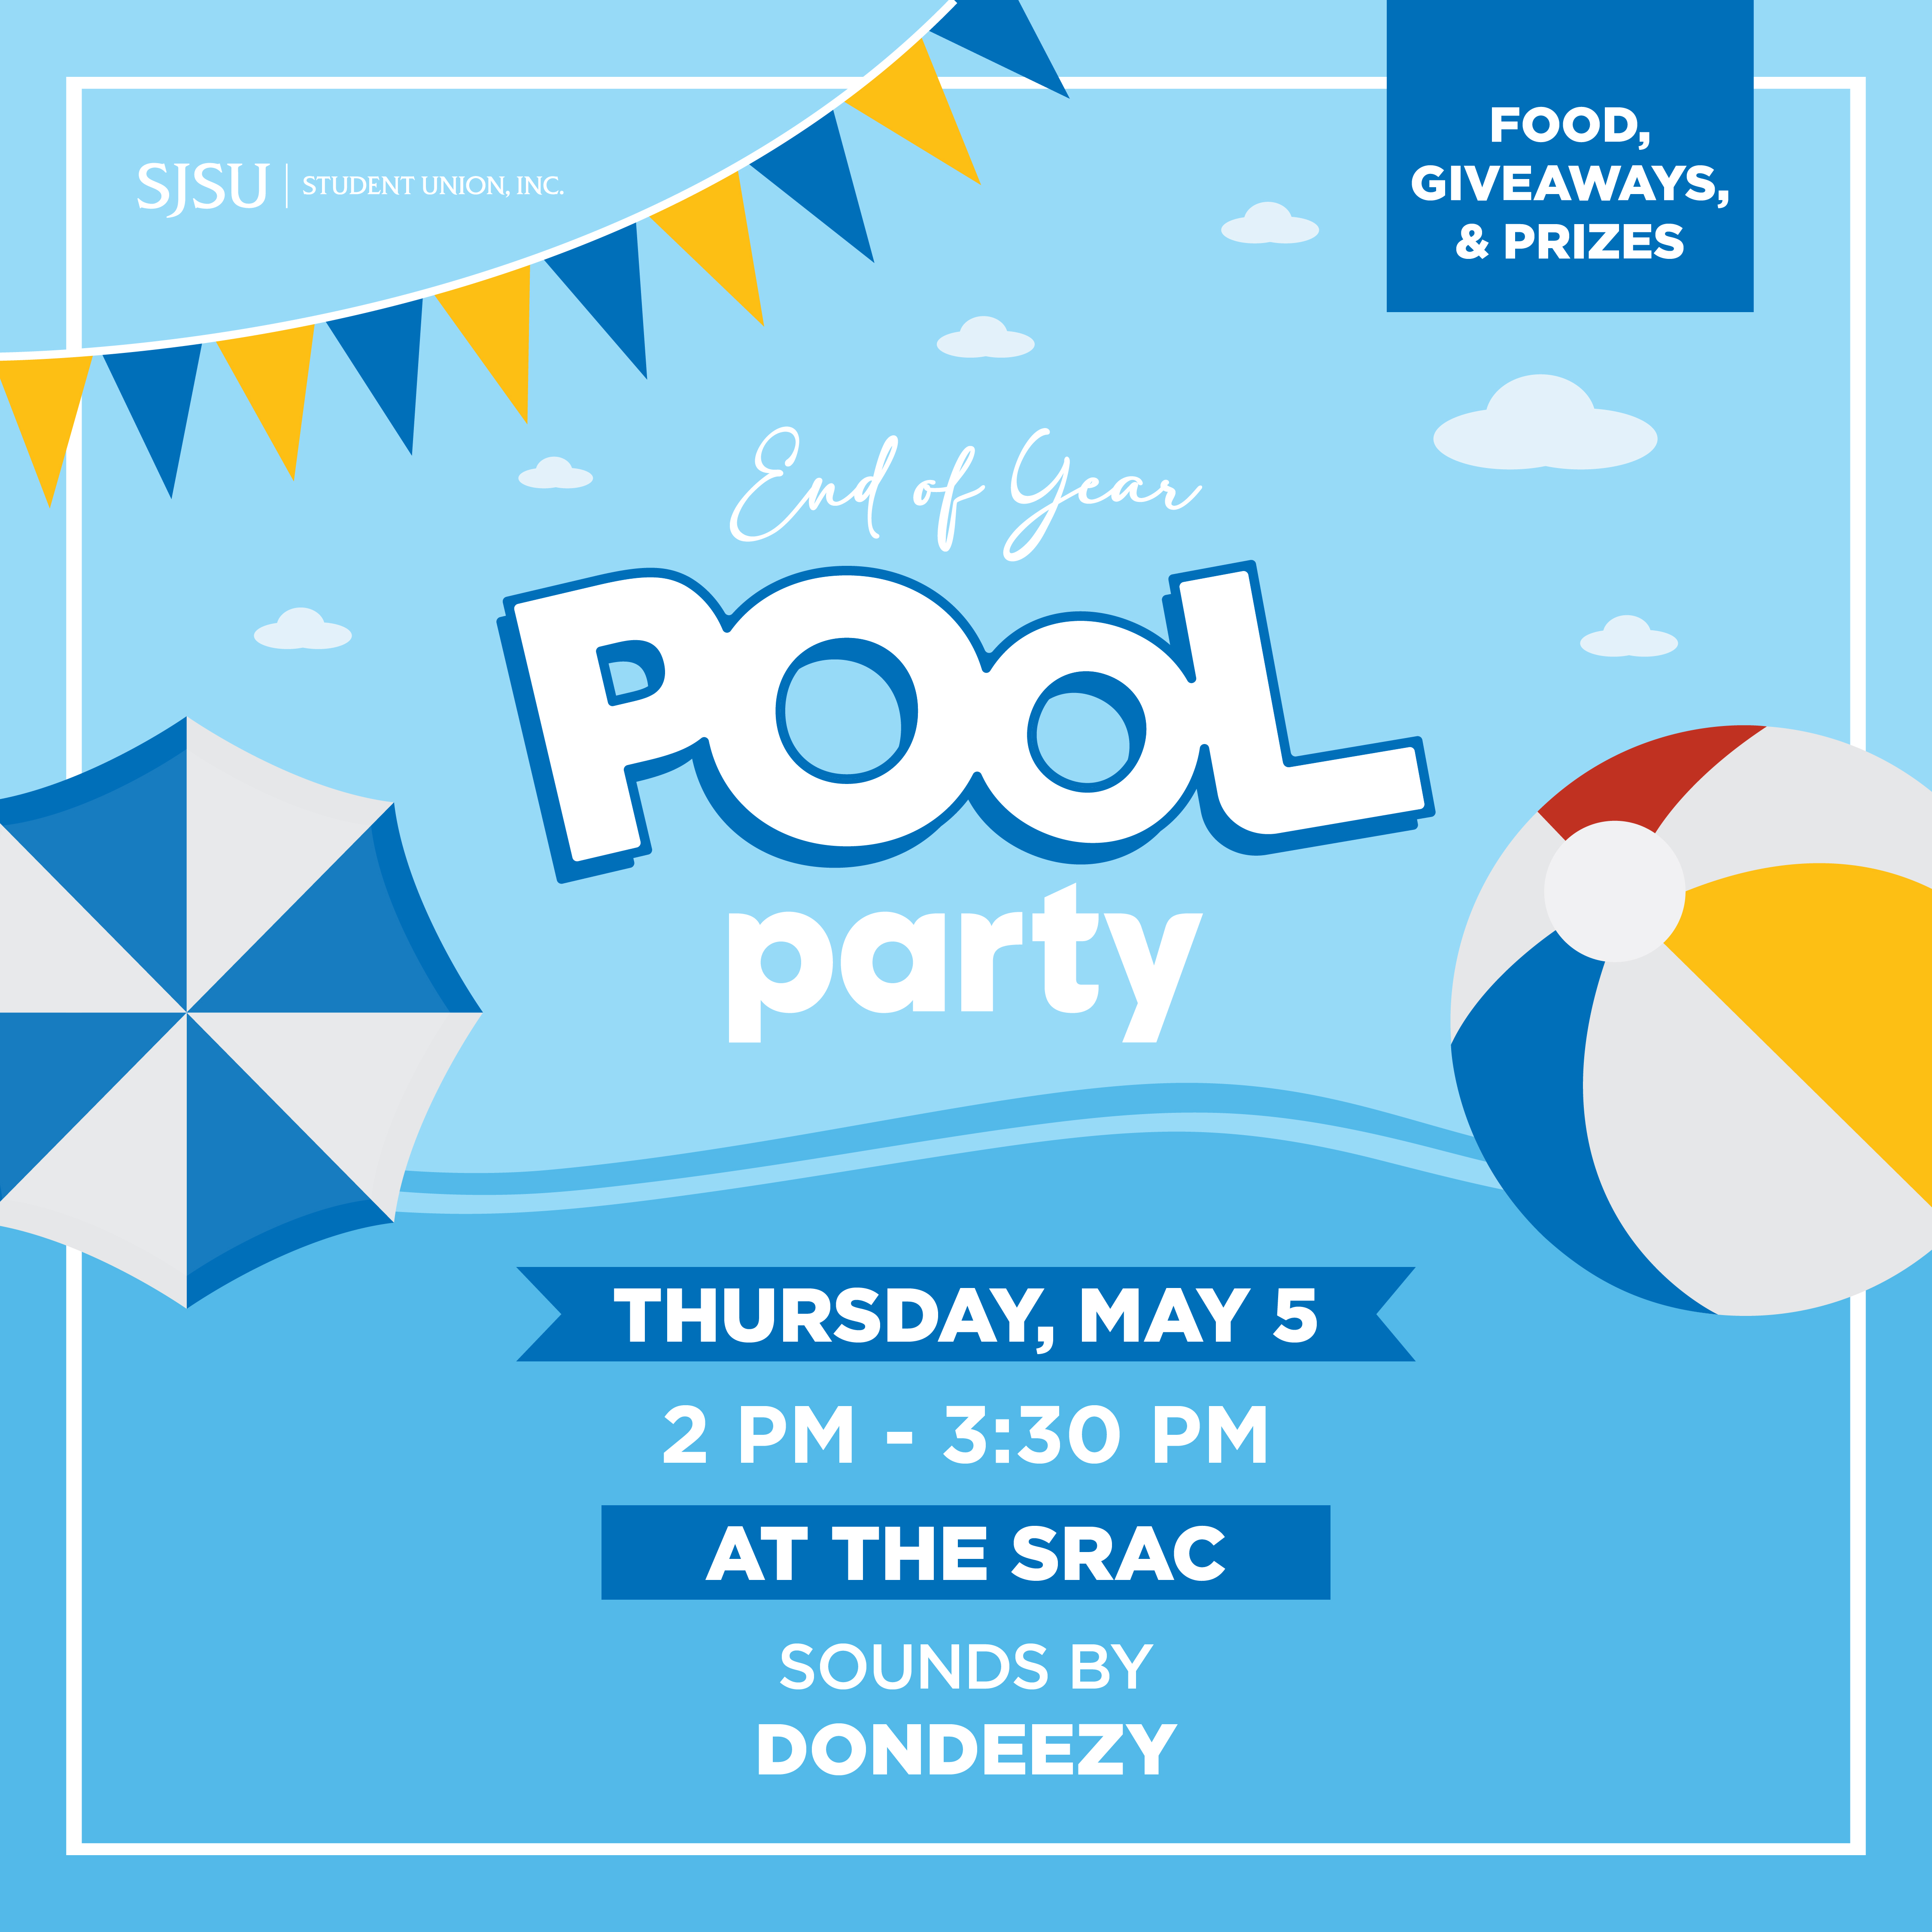 Student Union, Inc. End-of-Year Pool Party is on Thursday, May 5 from 2 PM - 3:30 PM at the SRAC Pool.